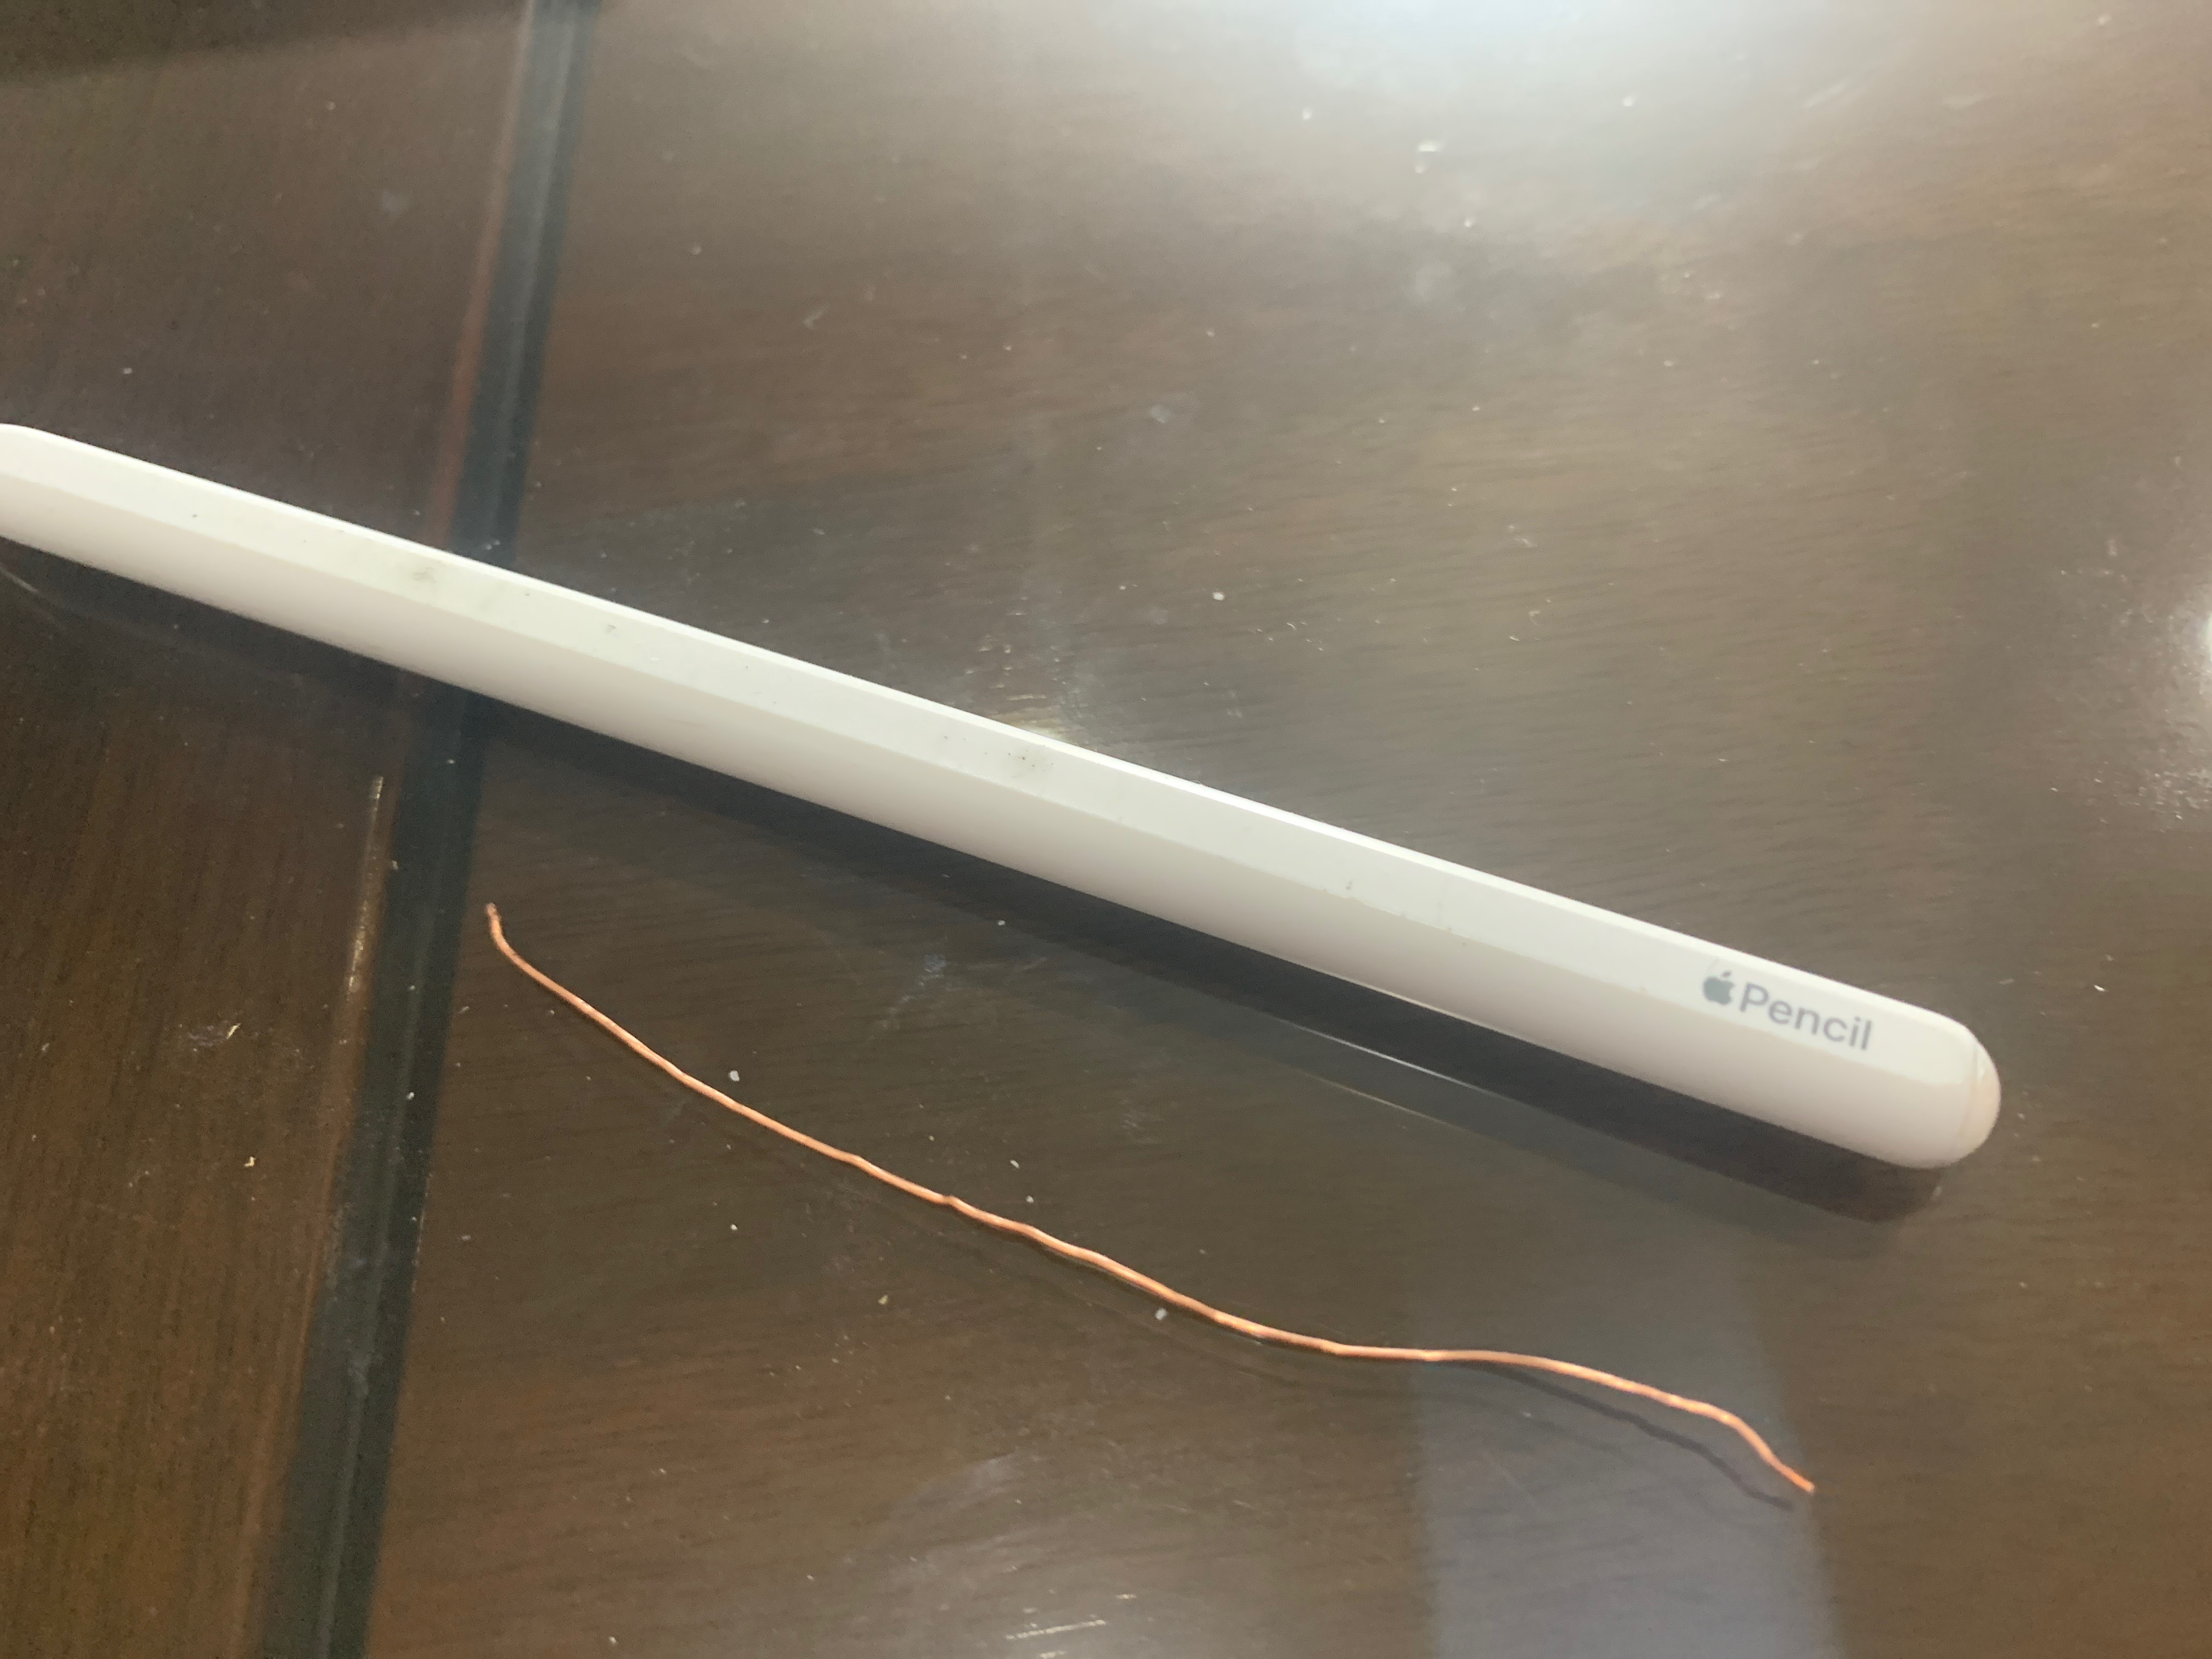 Can a dead Apple Pencil be fixed?